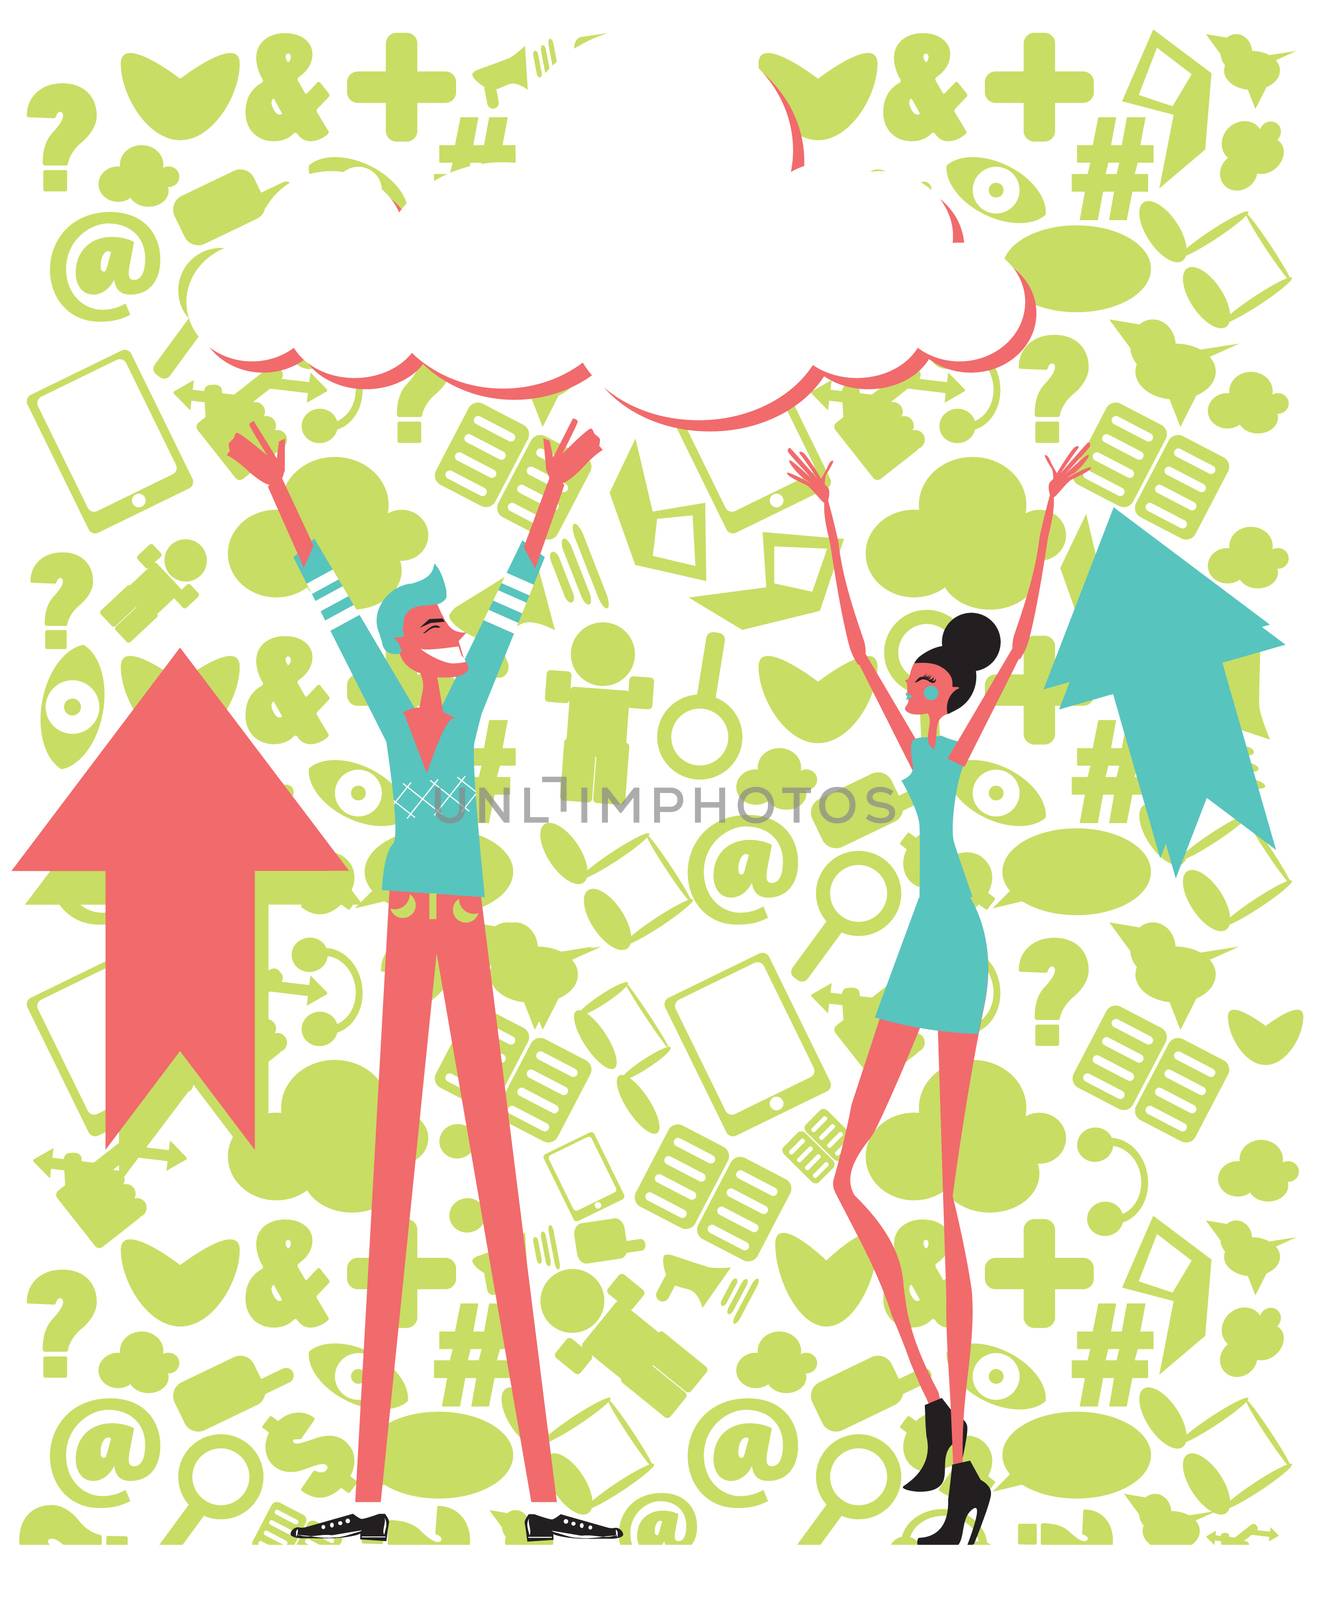 Cloud computing people concept on  background with social icons by IconsJewelry